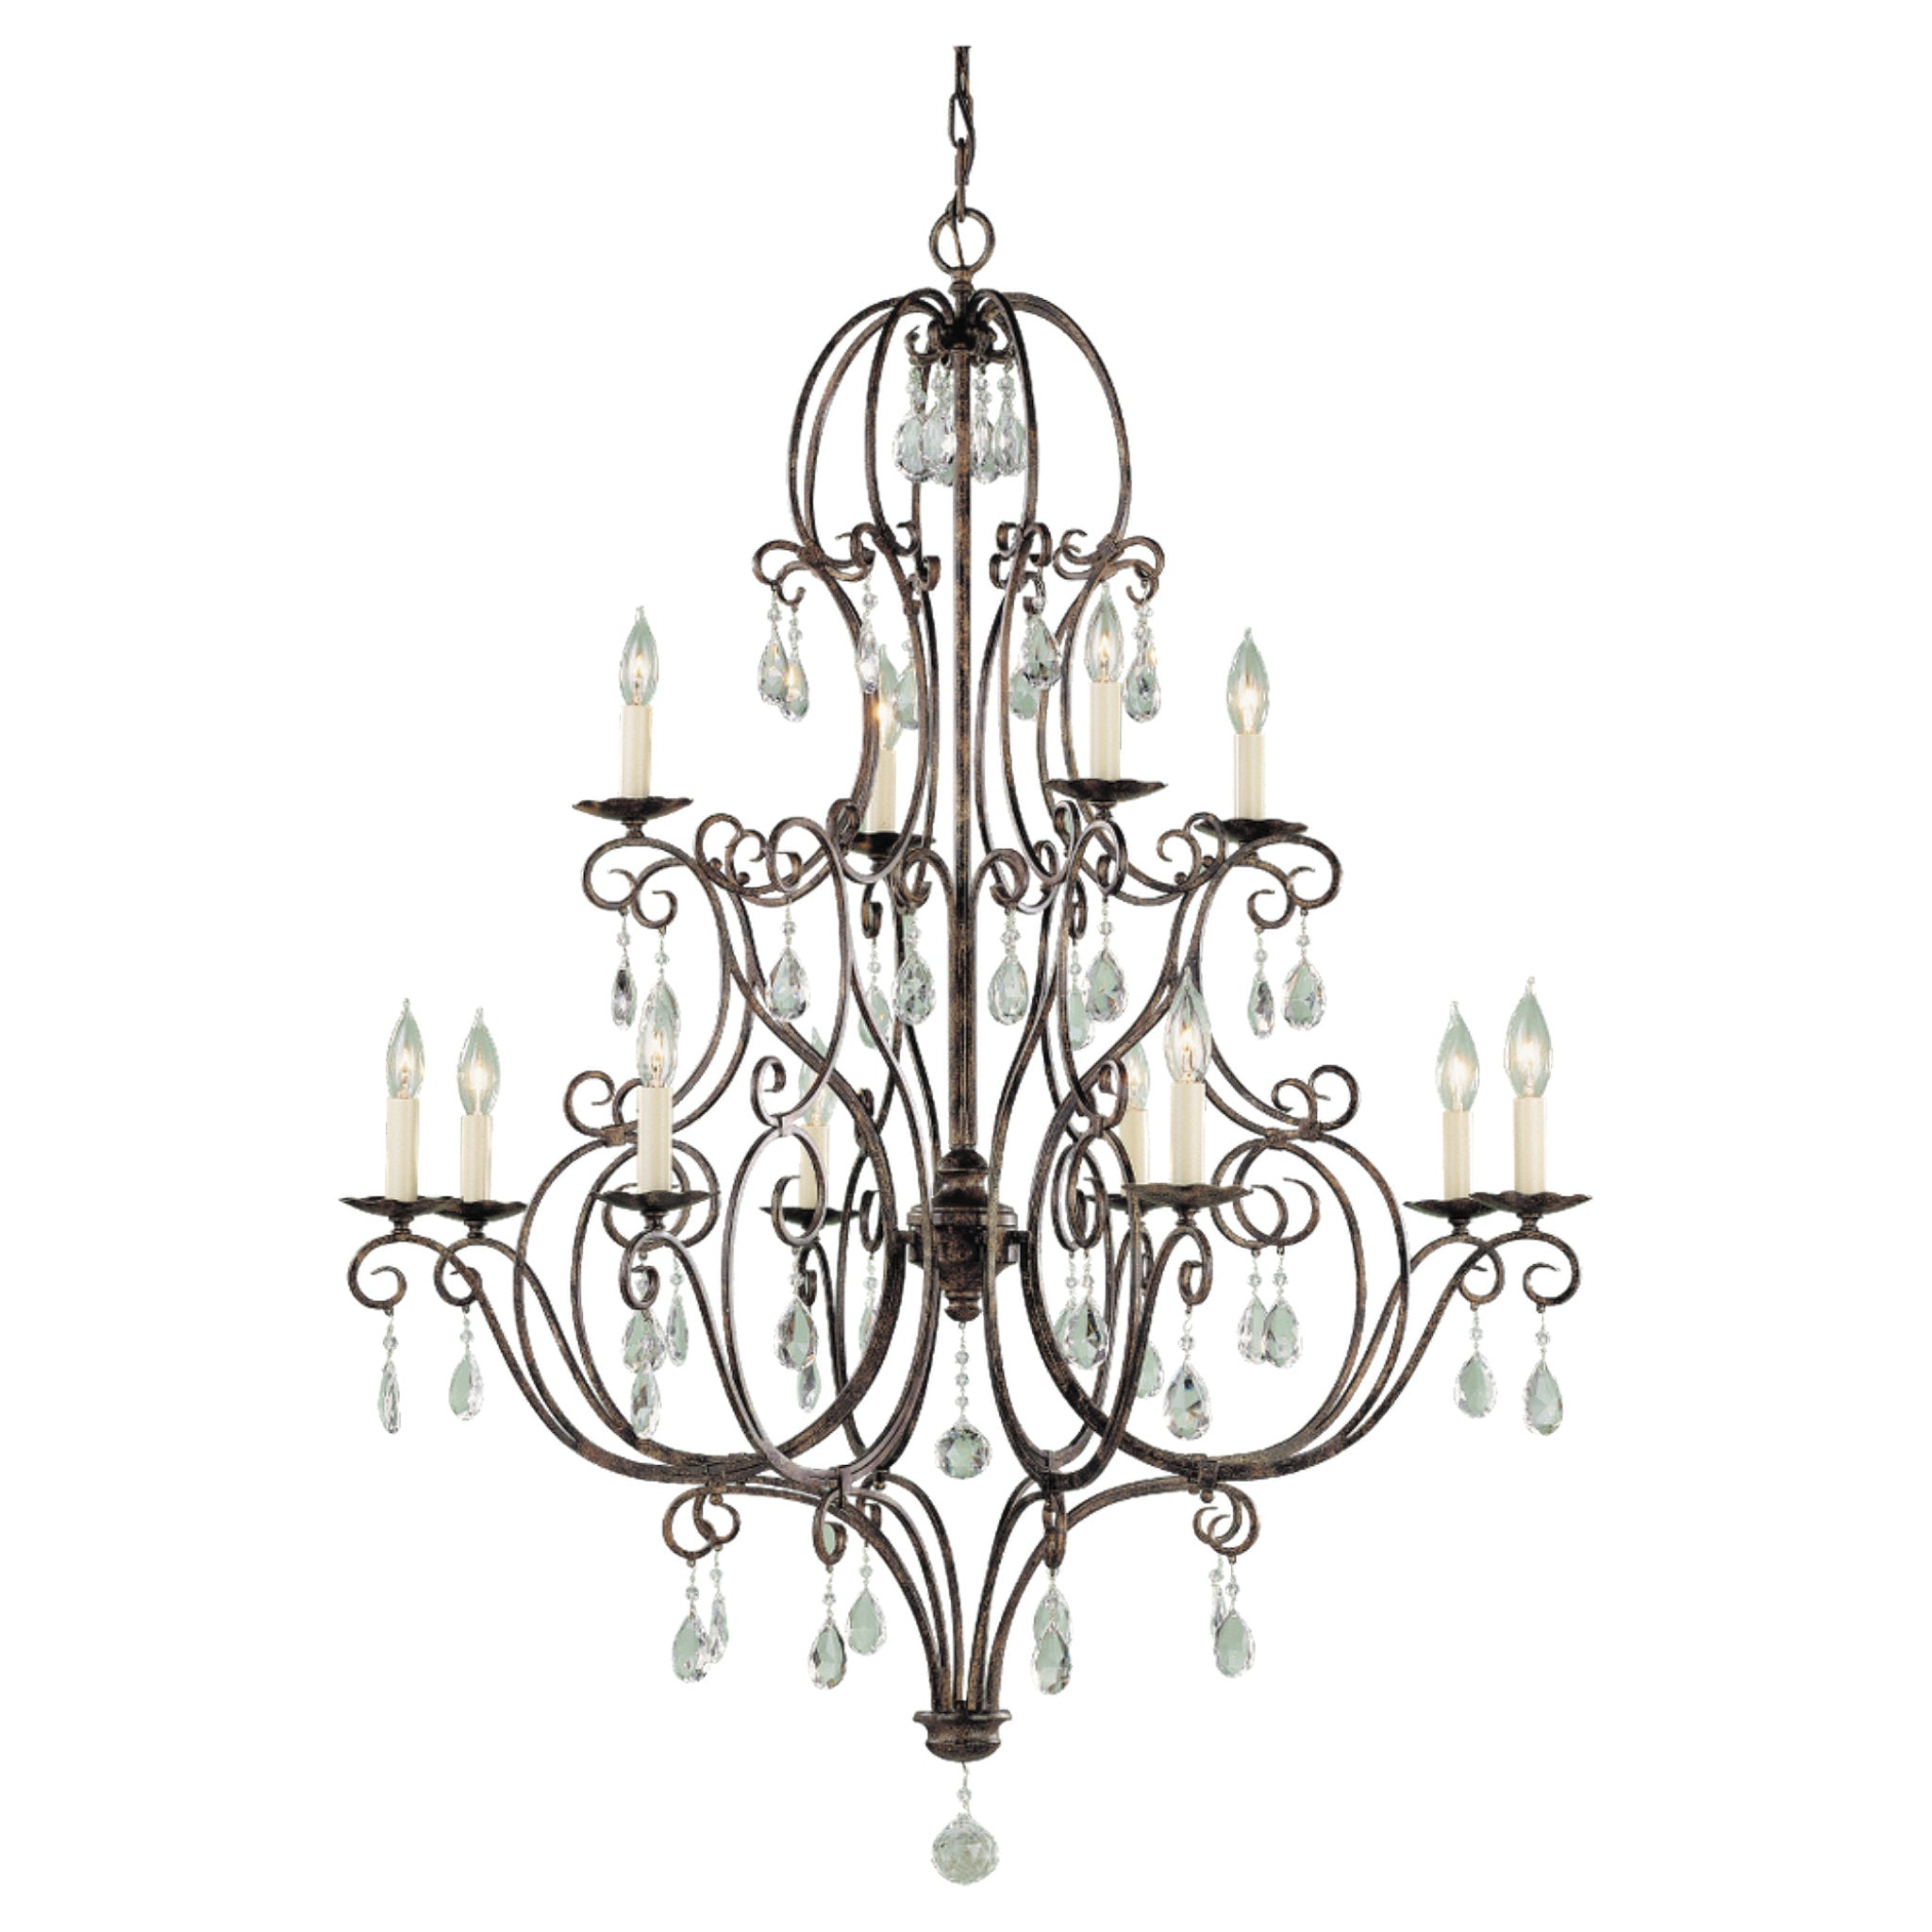 Chateau Large Chandelier Crystals 47" Height Steel in Mocha Bronze